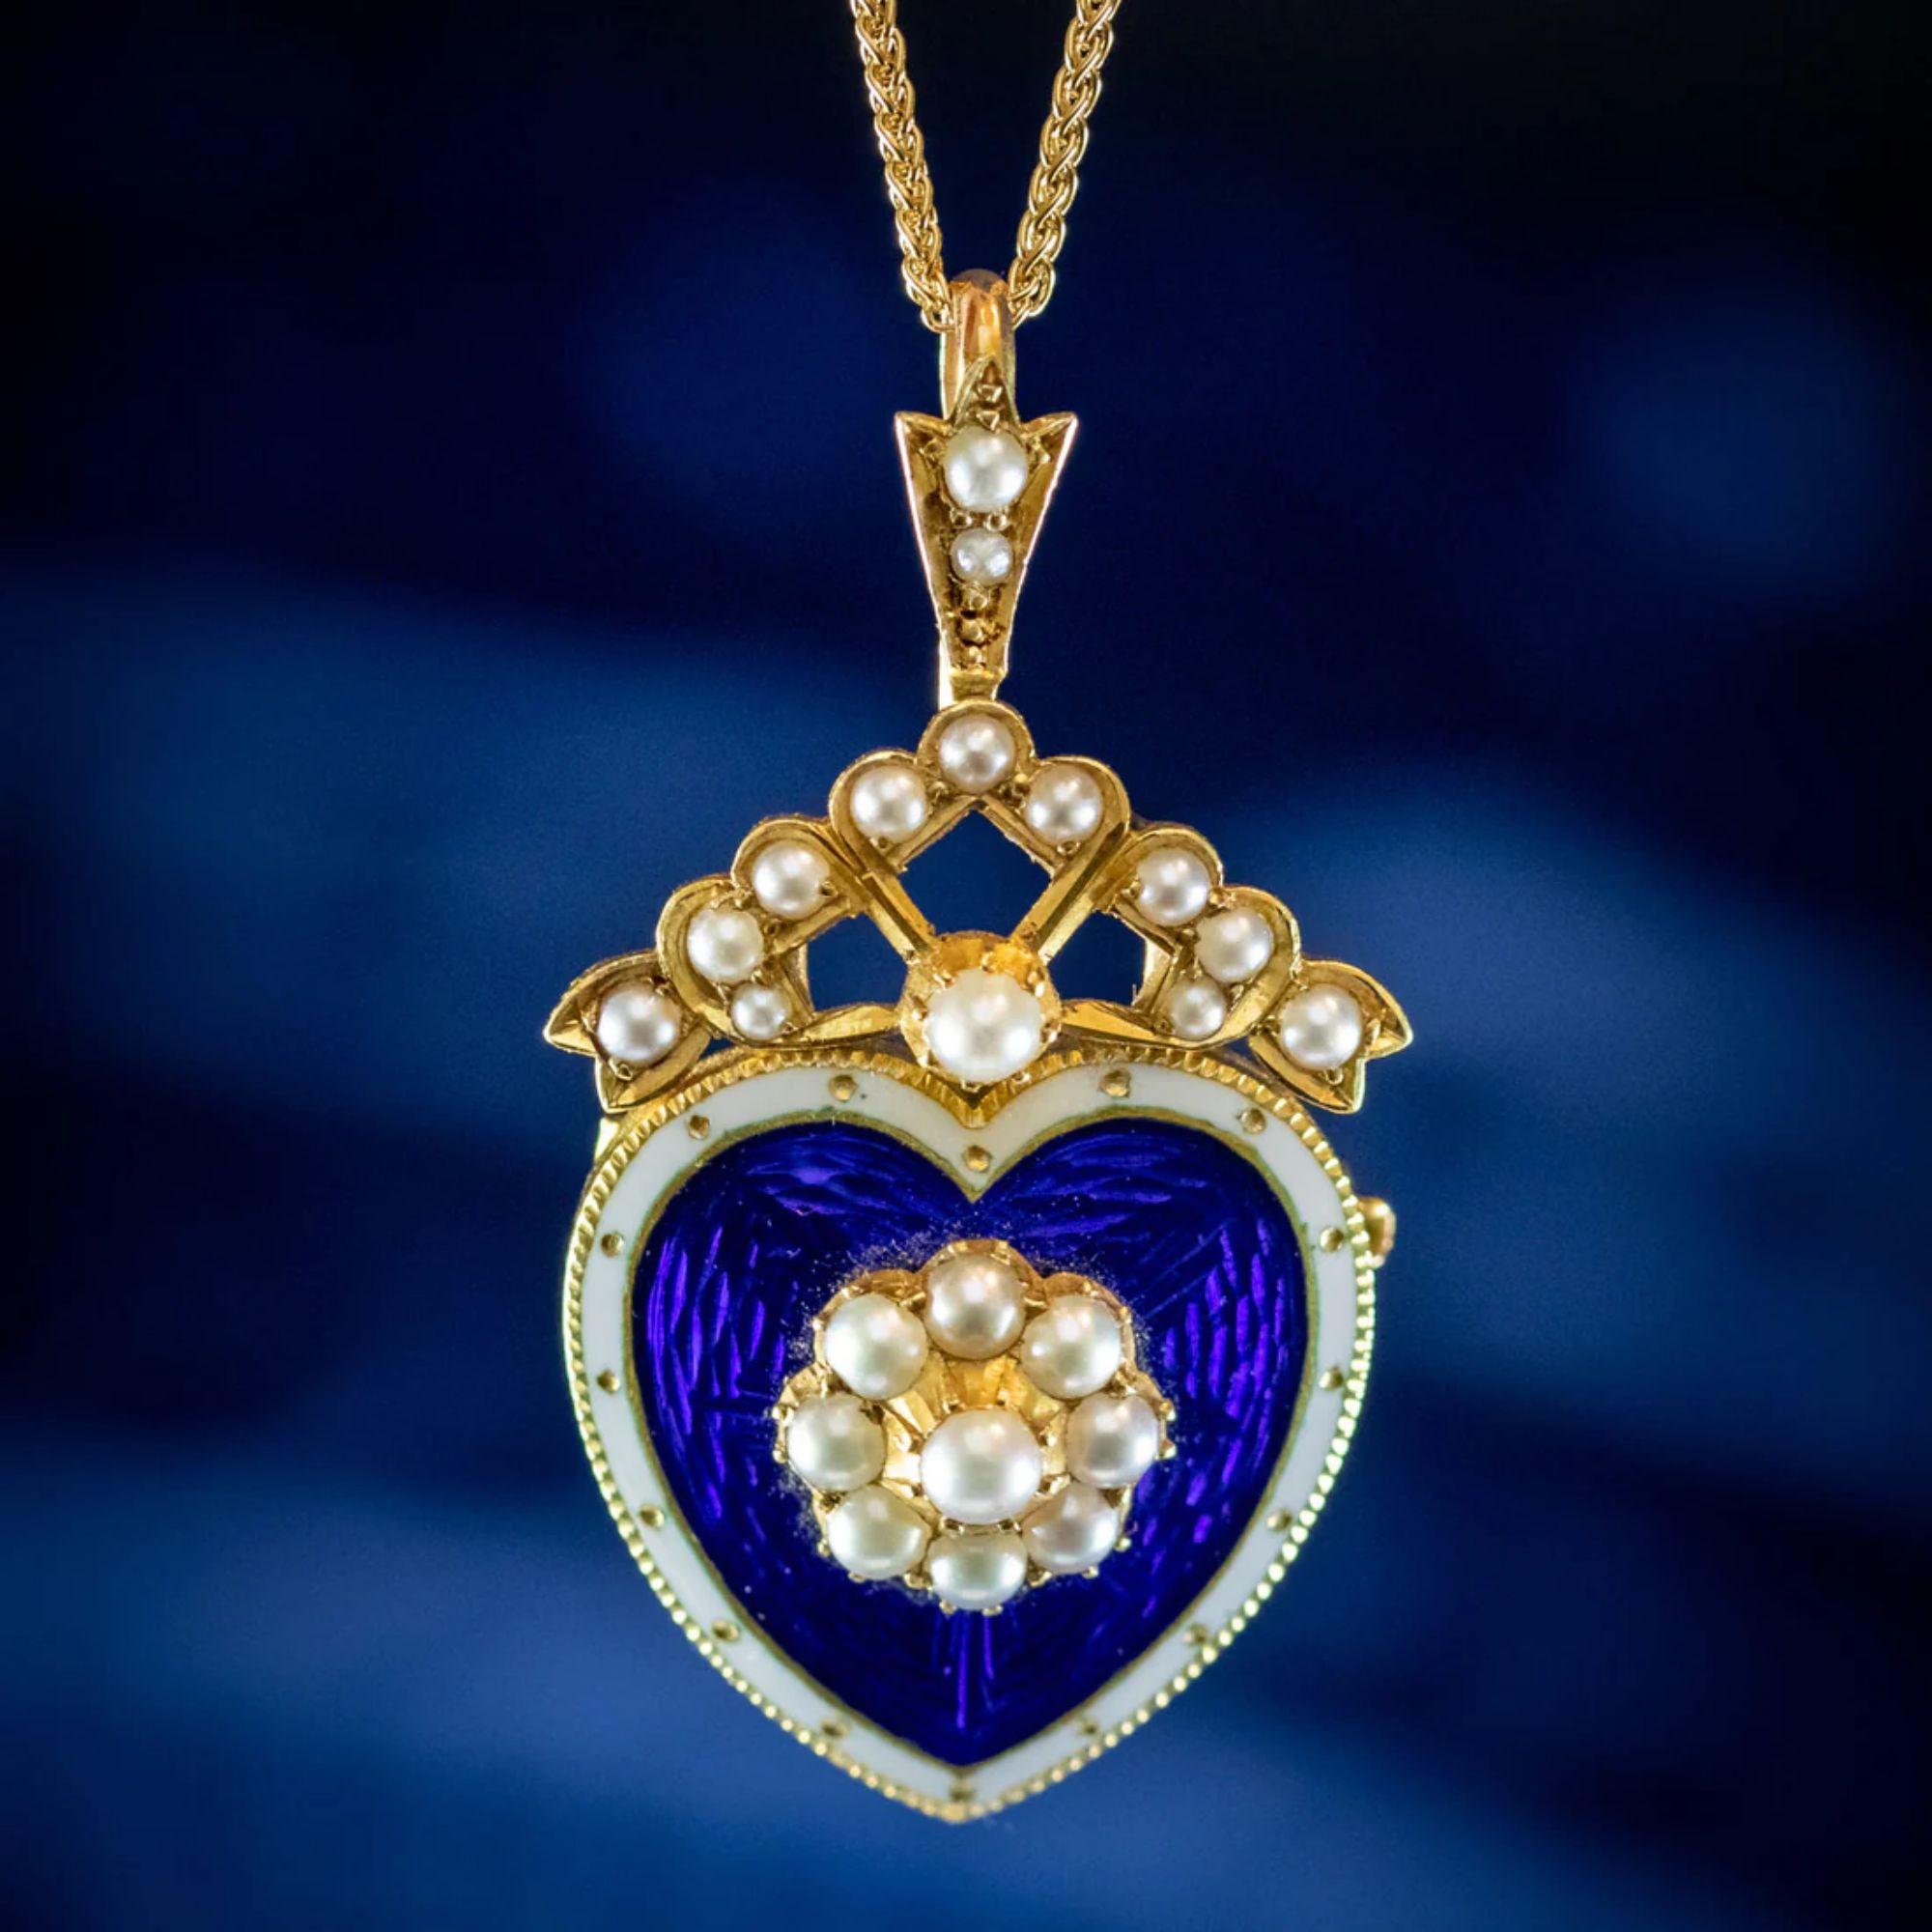 Edwardian Pearl Heart Pendant Necklace in 18Ct Gold Blue Enamel, circa 1901-1910 For Sale 2